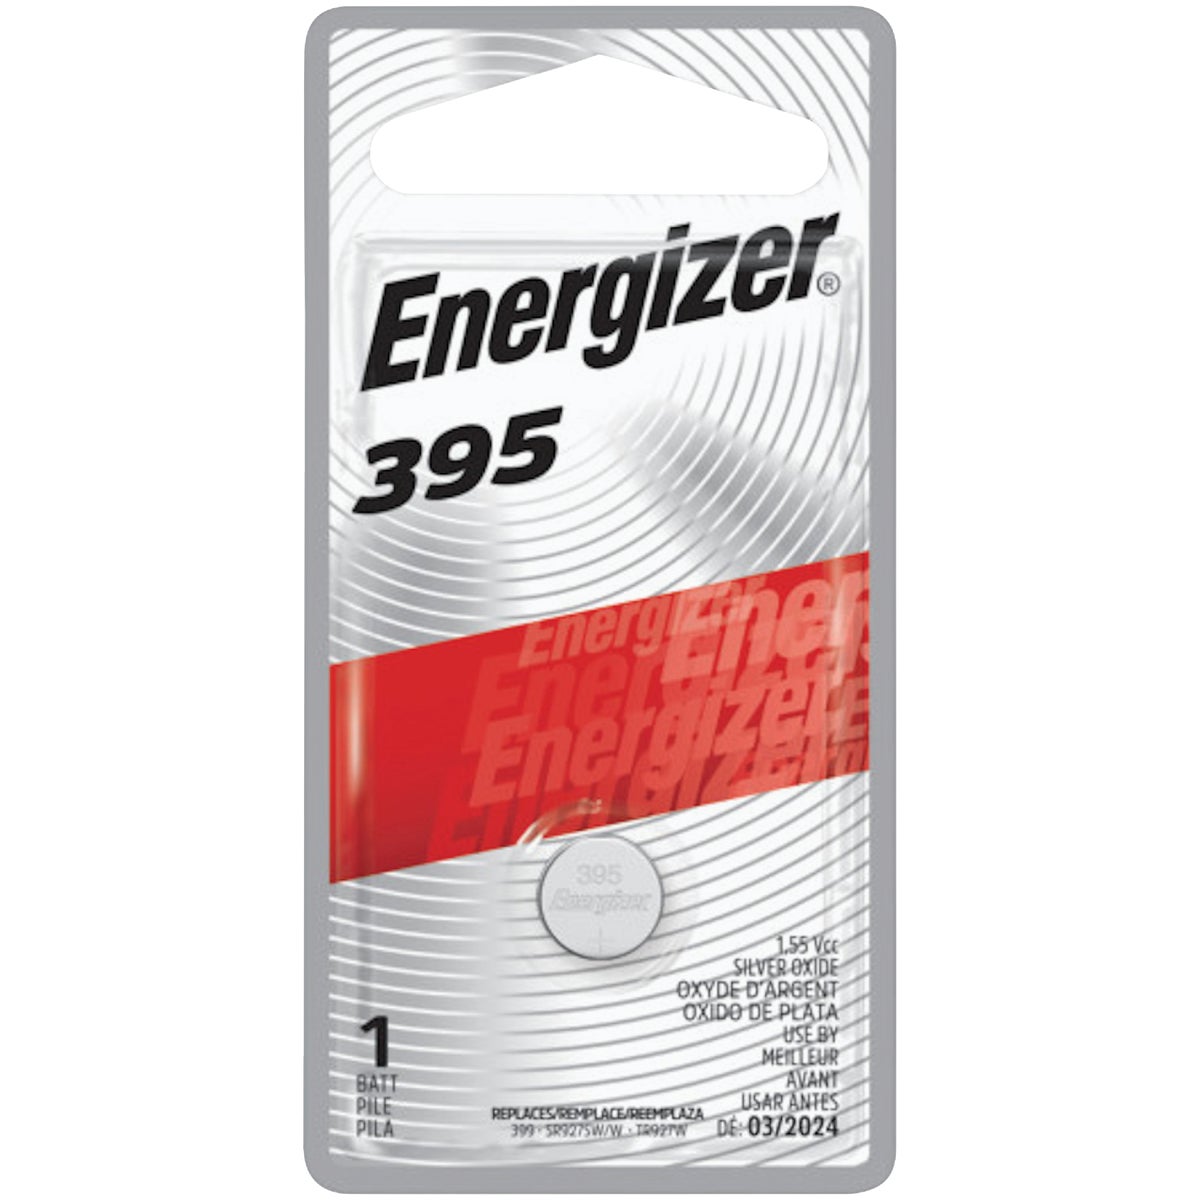 Energizer 395 Silver Oxide Button Cell Battery